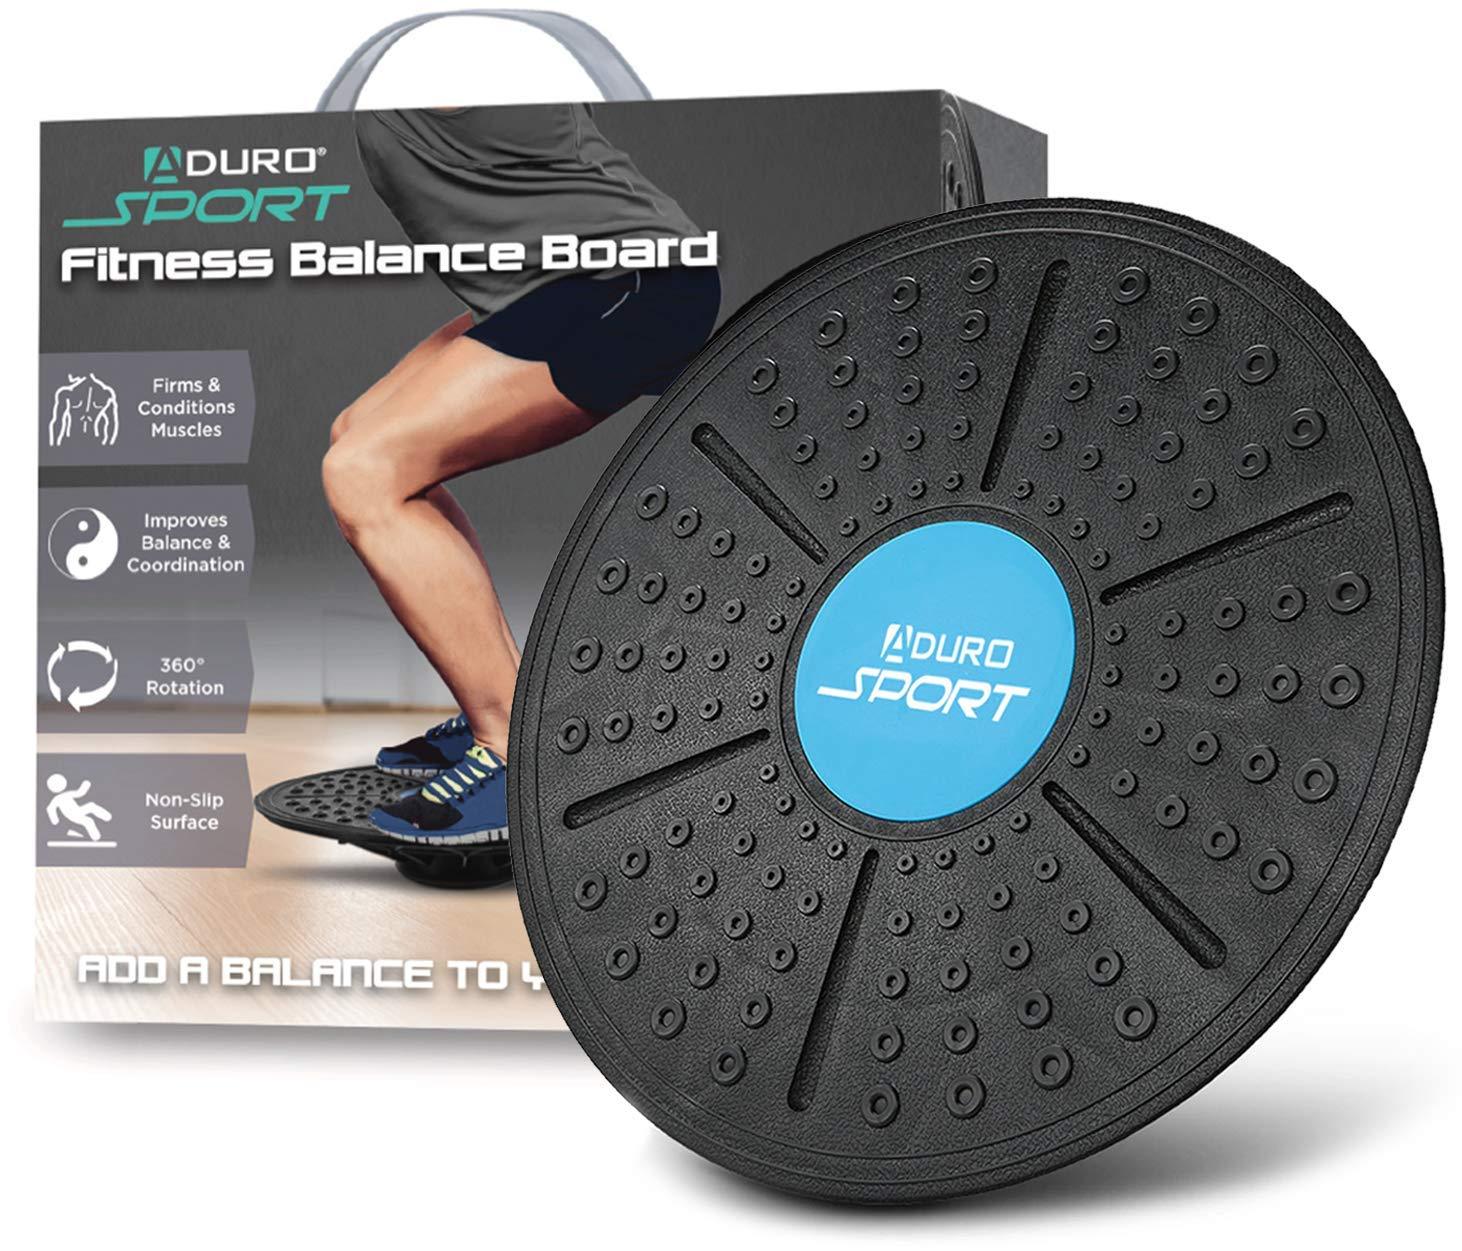 Workout Aduro Products Sport – Board Gear Indoor Home ADURO Fitness Balance